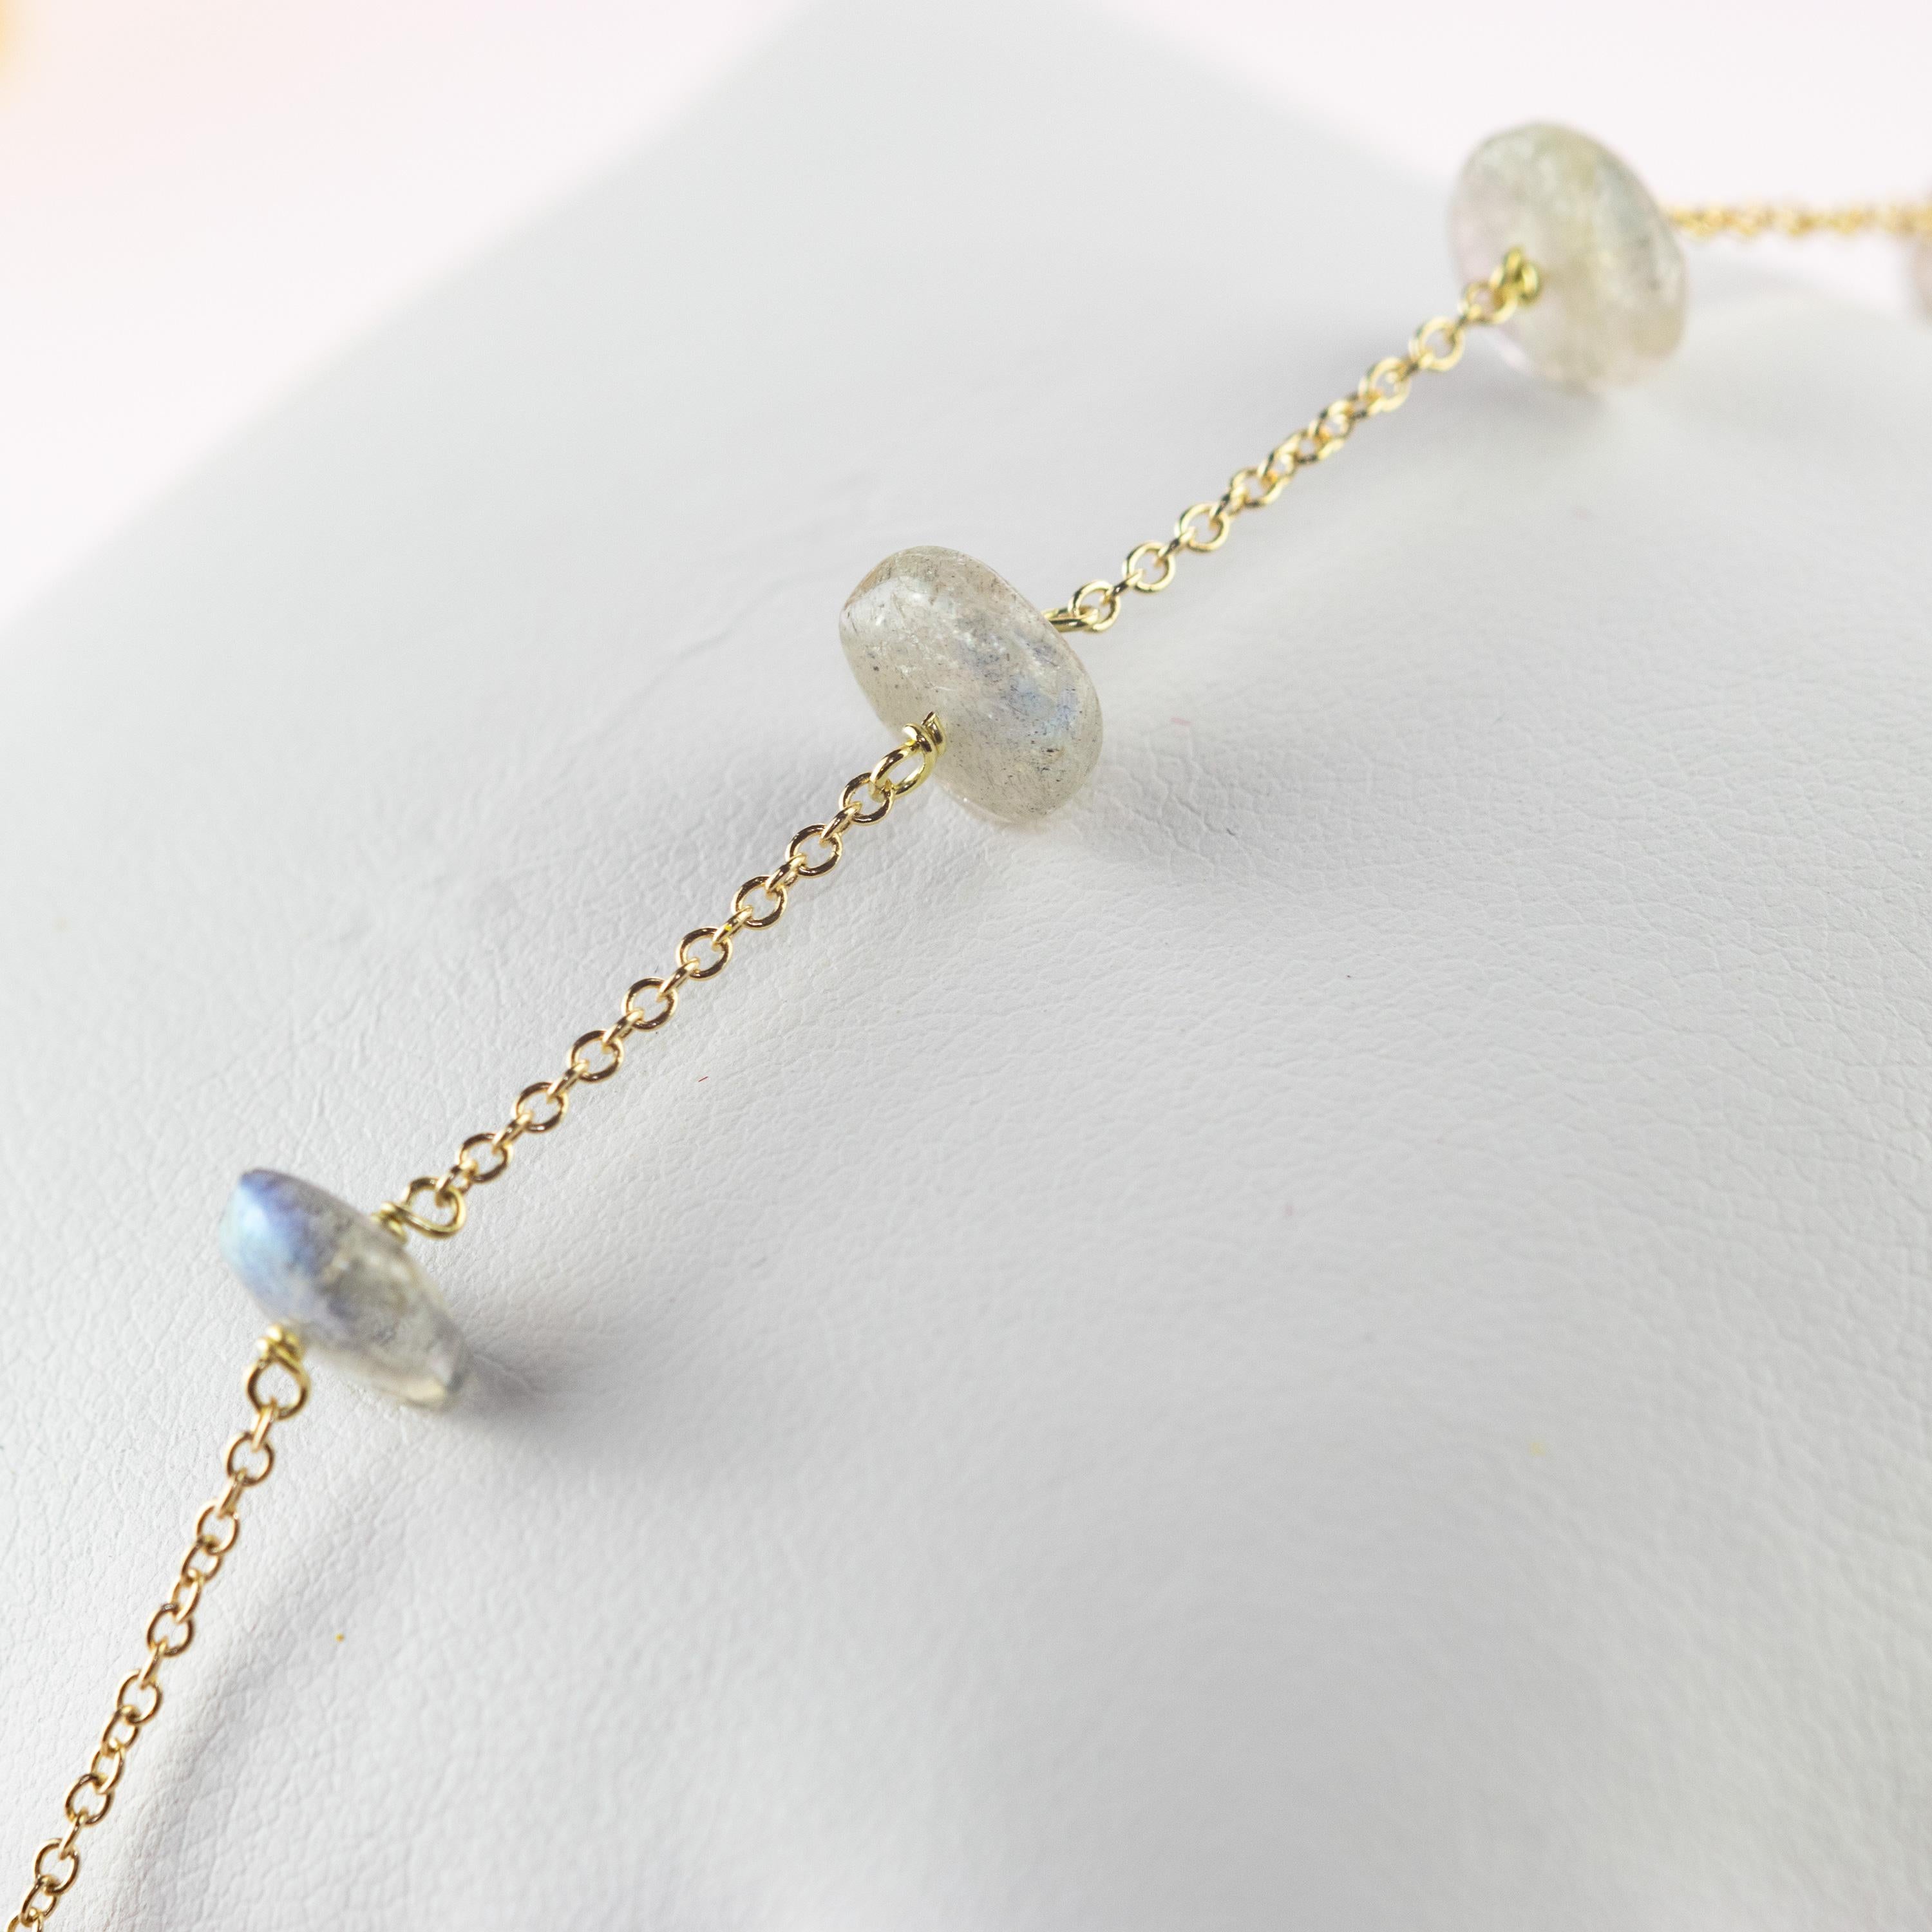 Marvellous bracelet starring natural Cat's Eye beads, for a bright charm of uniqueness. Luminous jewel with natural precious jewellery on elegant Gold Plate setting. Anklet and Bracelet.

Cat's Eye Stone has meaning and properties of enhancing